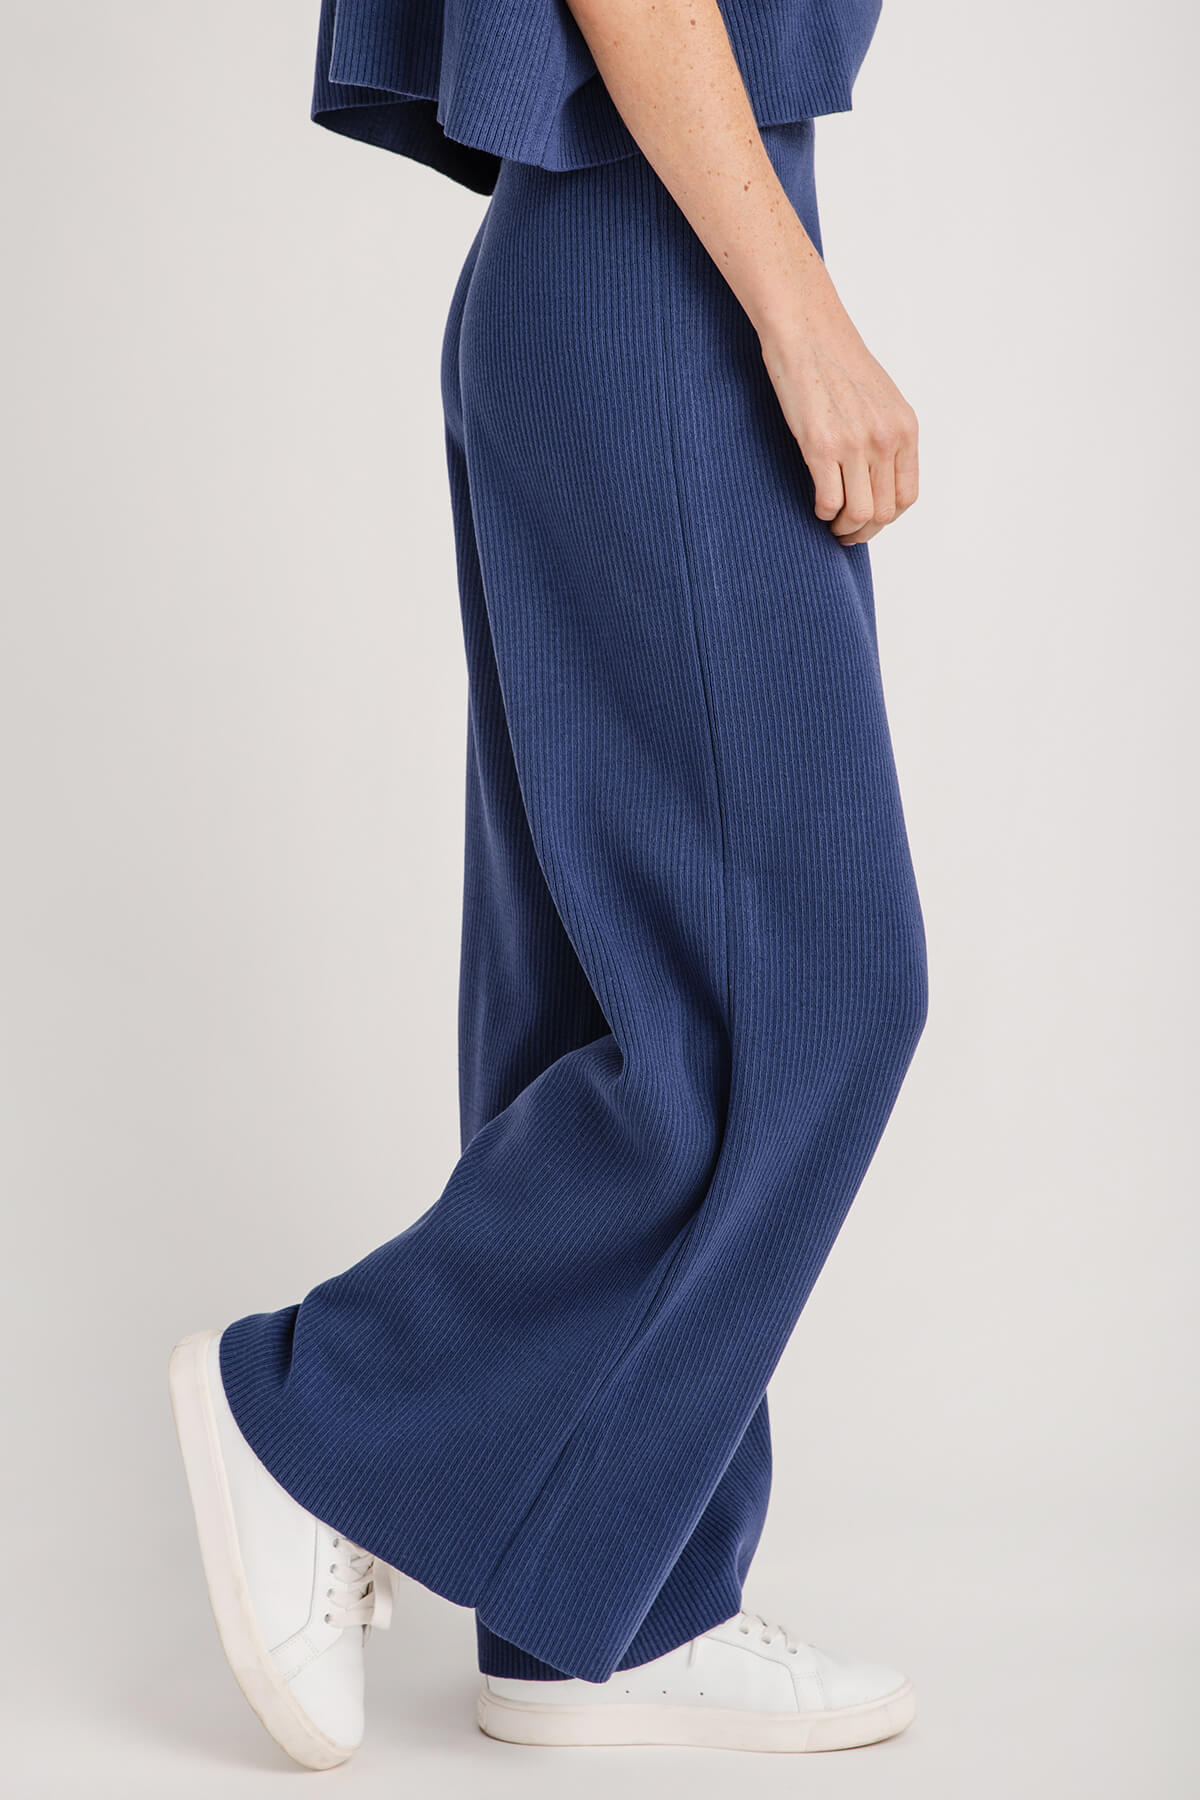 By Together Wideleg Knit Pant